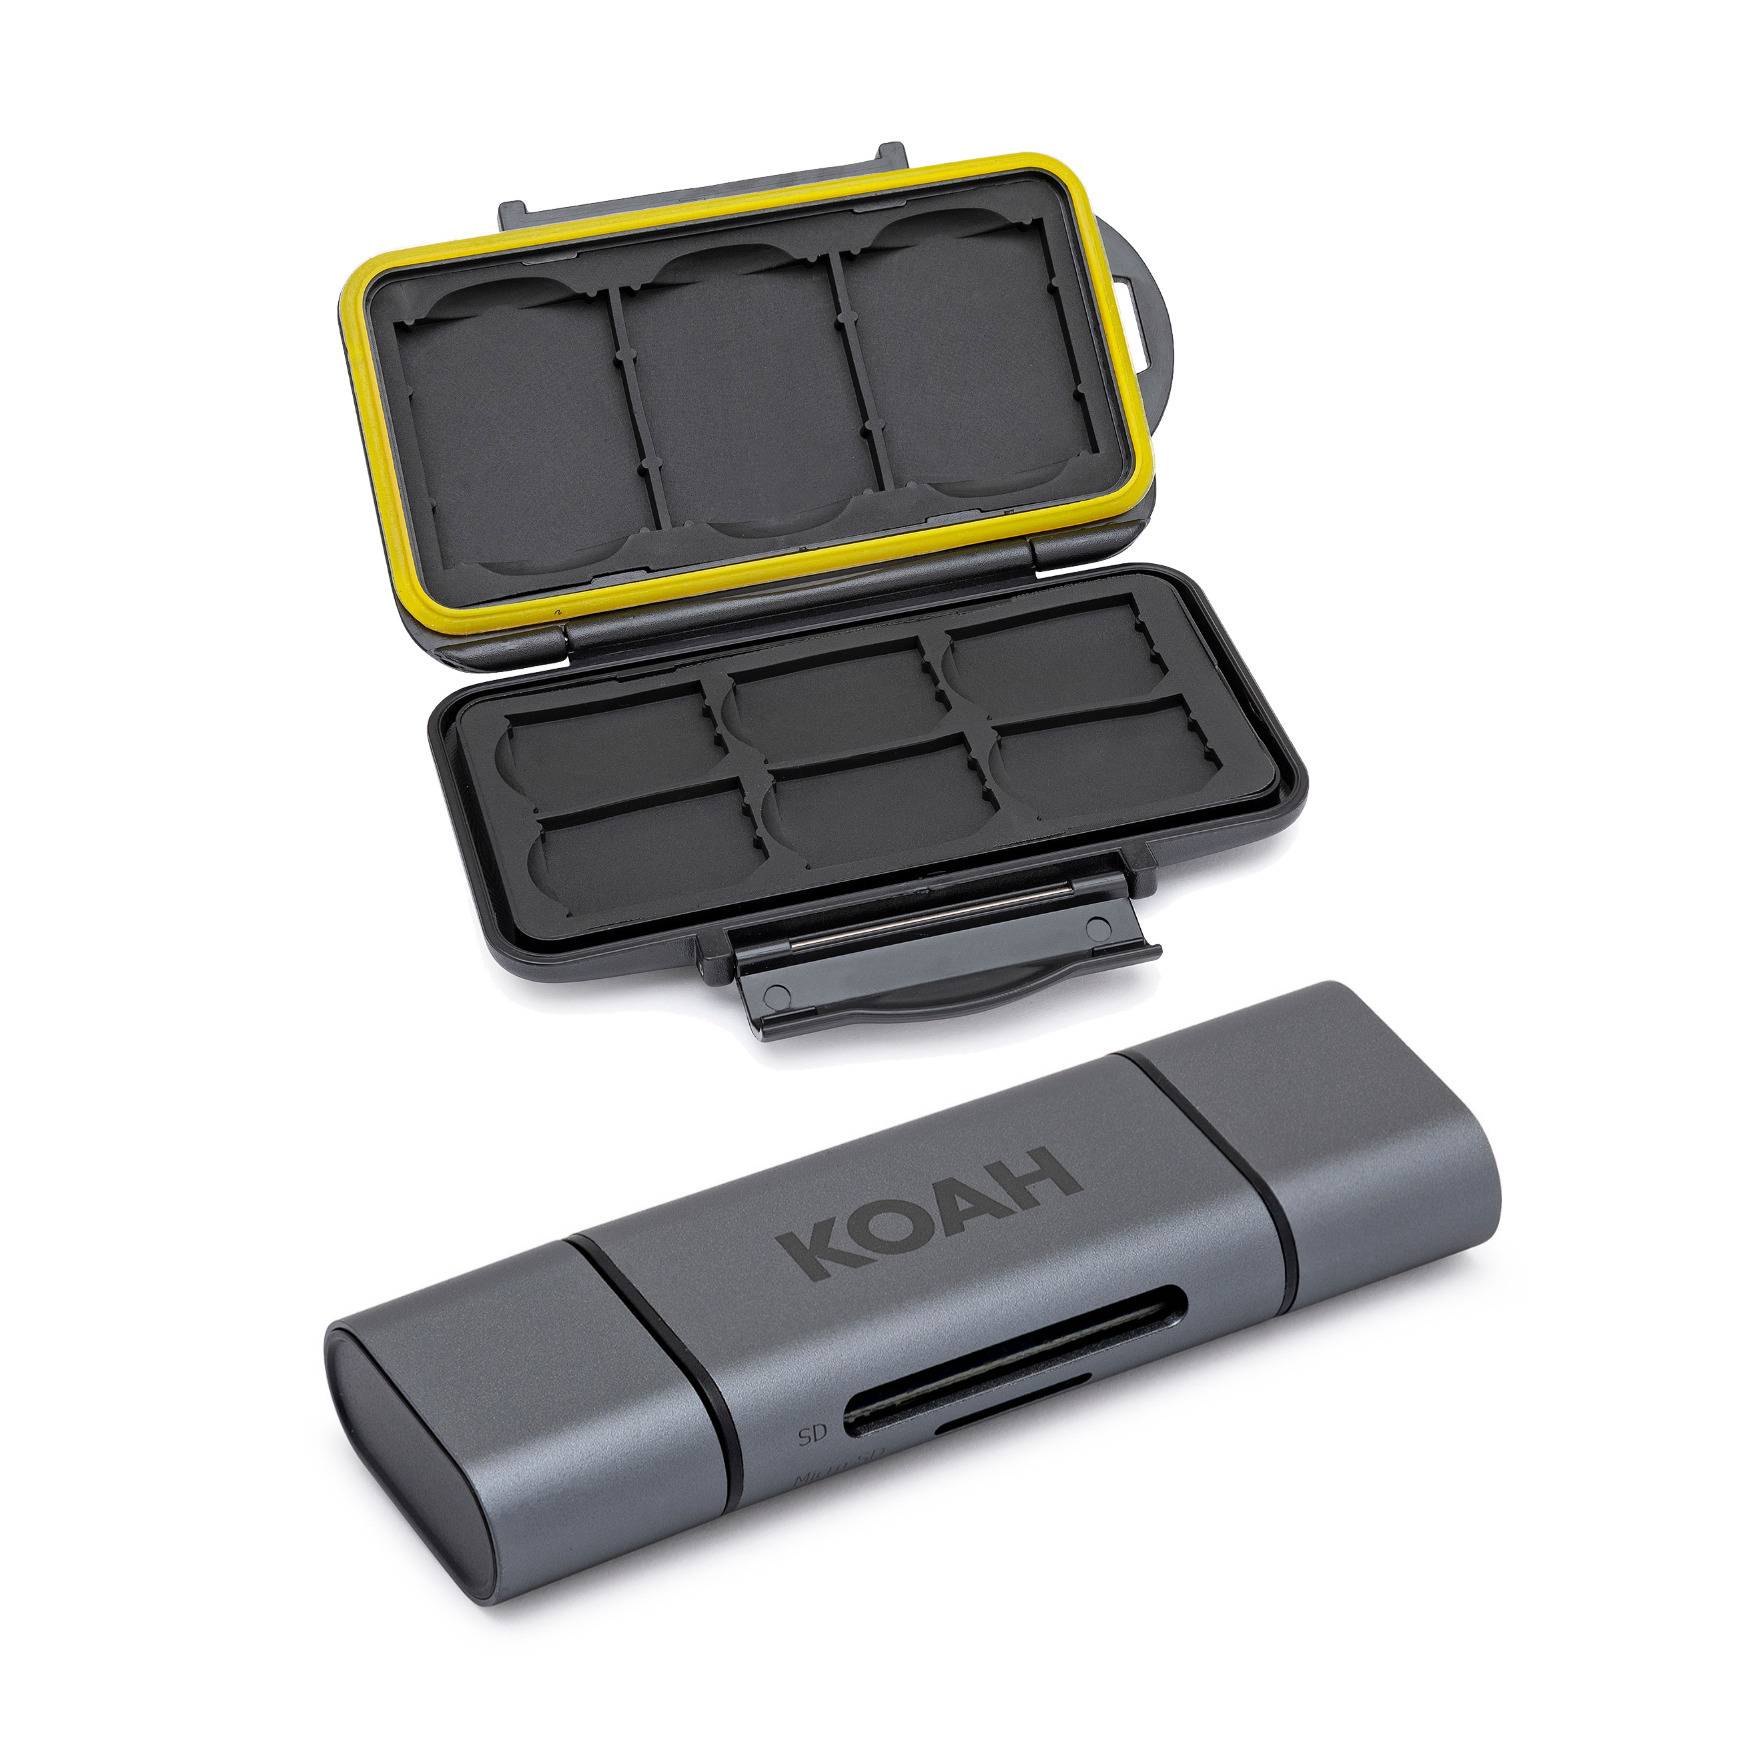 Koah Rugged Memory Storage Carrying Case and 2-in-1 Aluminum Dual Slot SD Card Reader Bundle